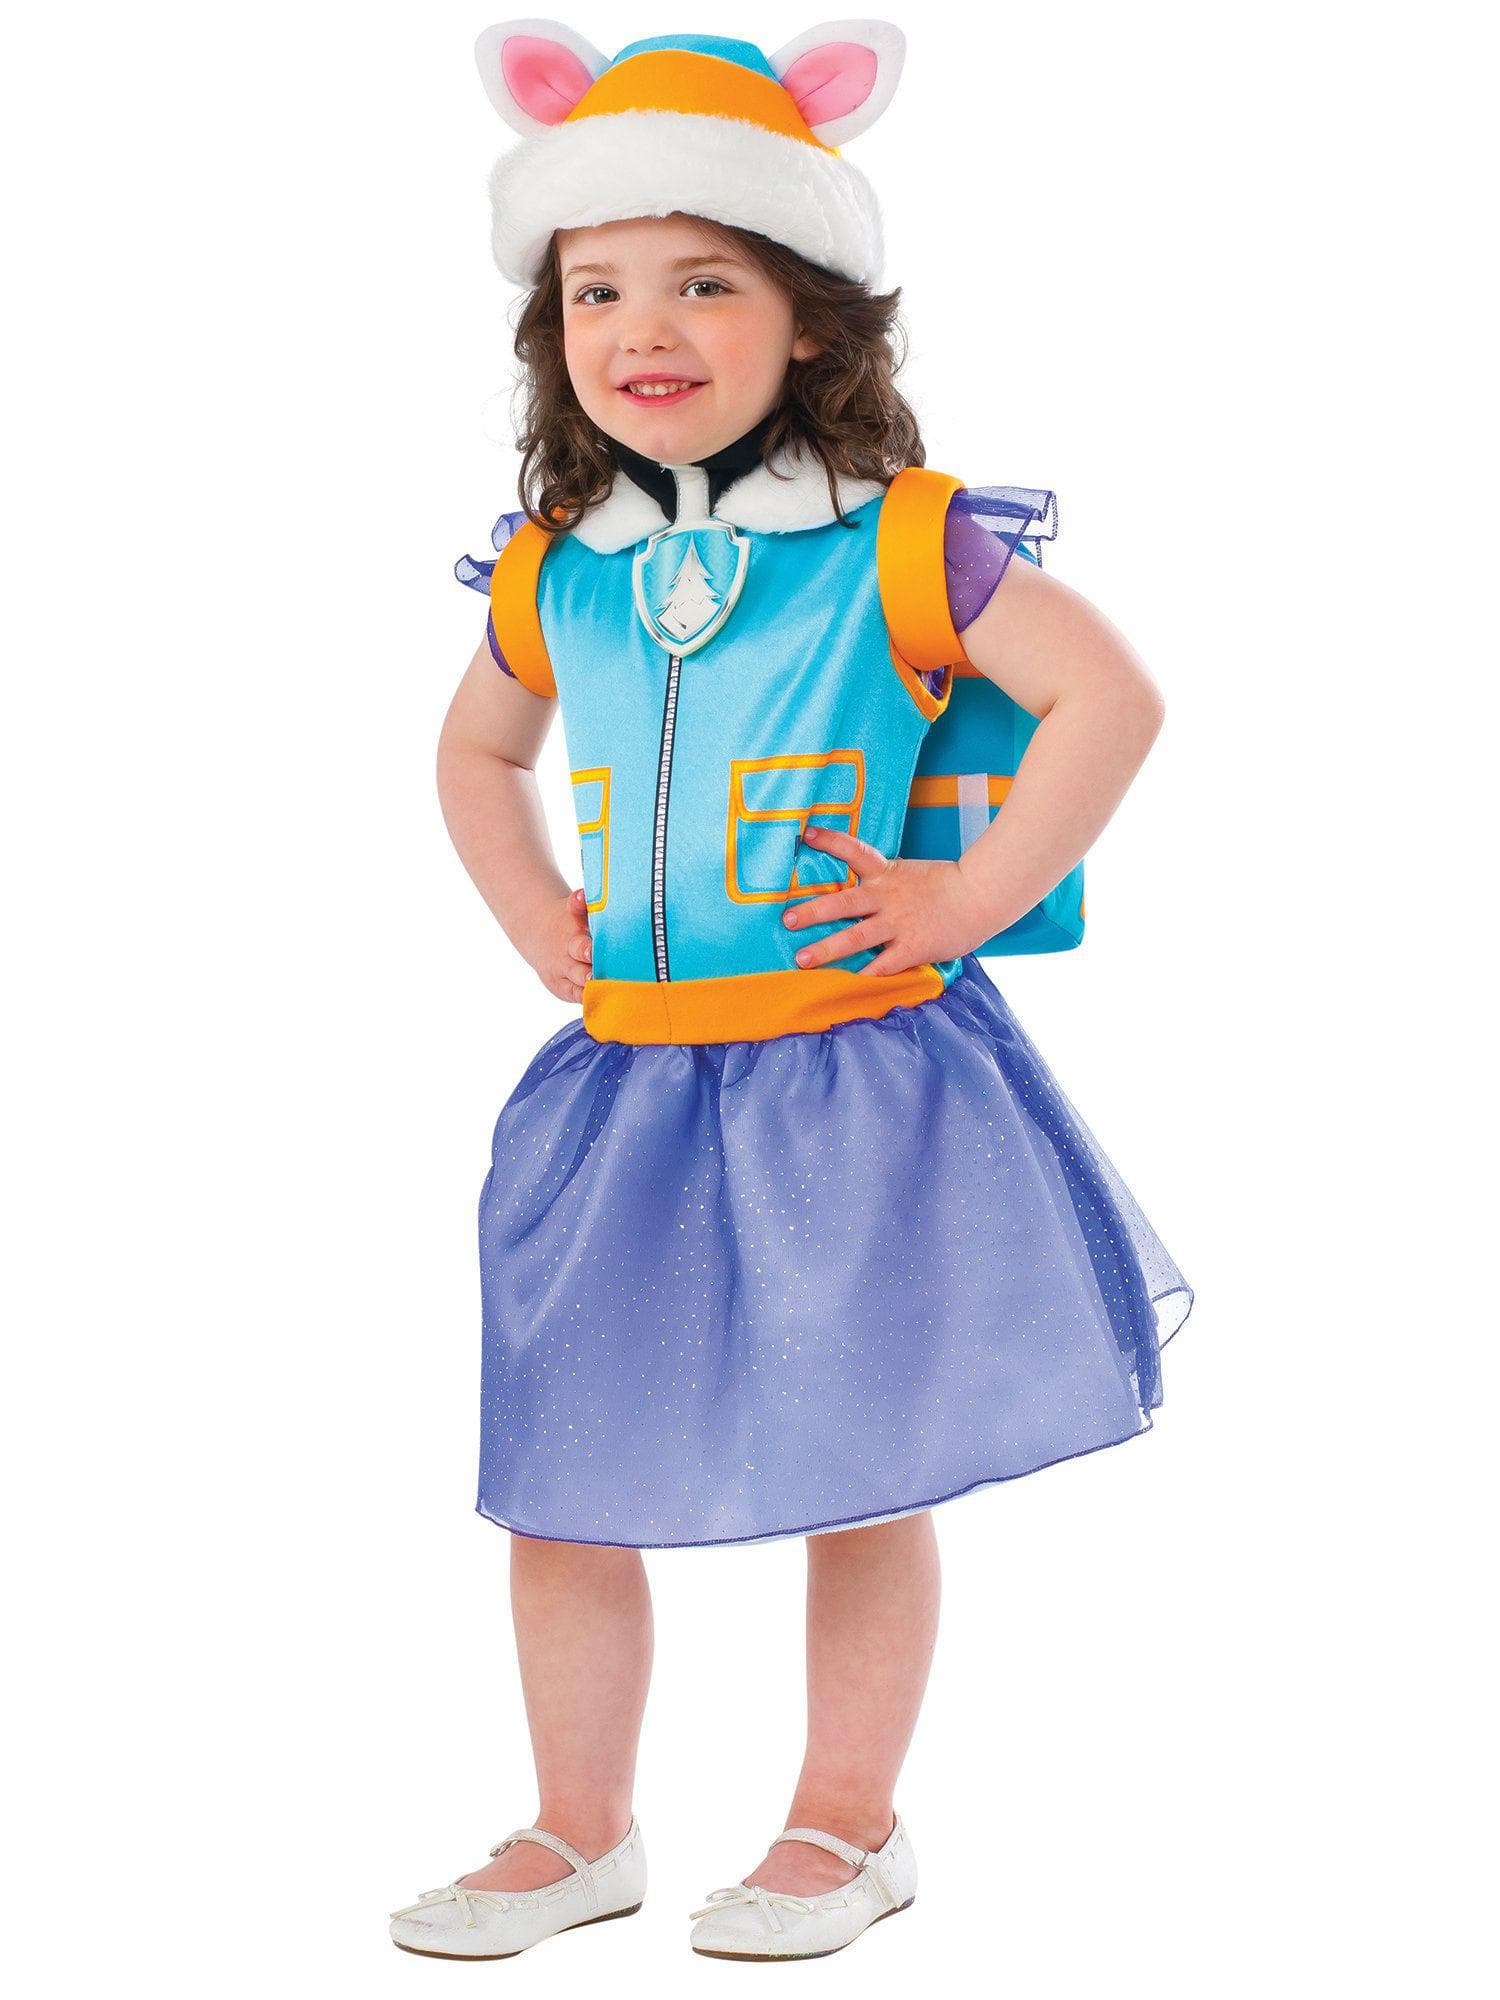 Paw Patrol Everest Dress, Hat and Backpack for Toddlers - costumes.com